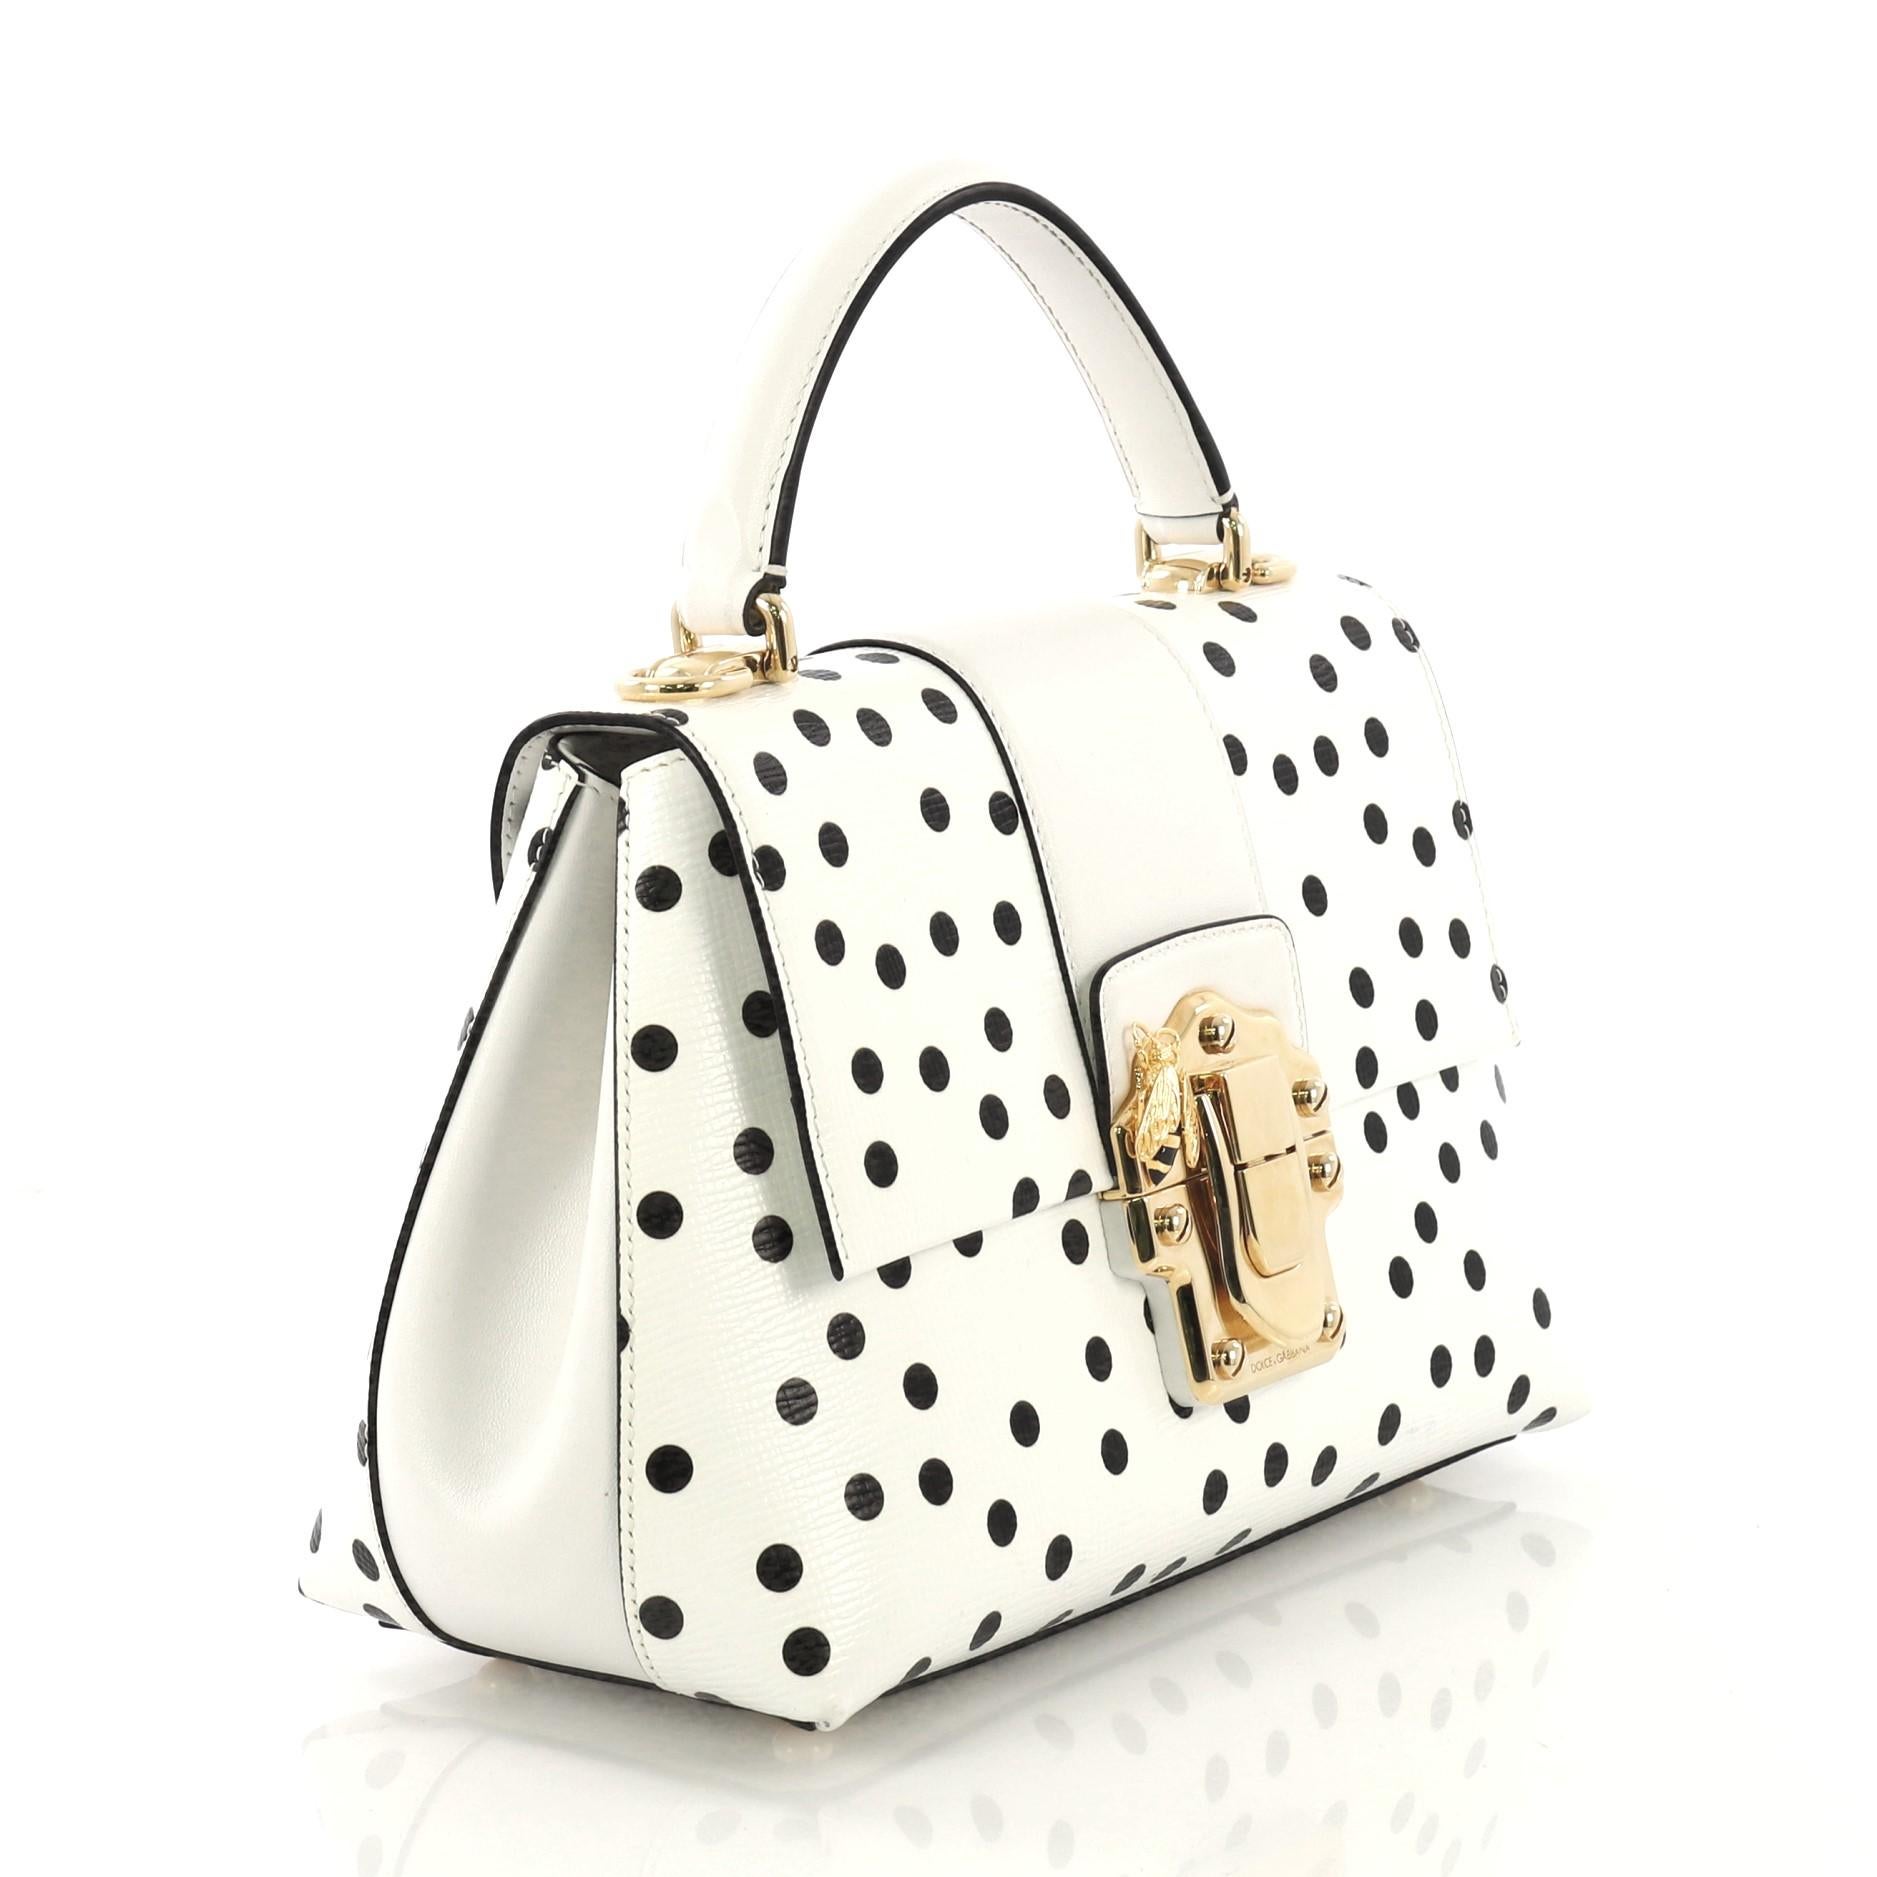 This Dolce & Gabbana Lucia Top Handle Bag Printed Leather Medium, crafted from black and white polka dot printed leather, features a leather top handle, adjustable shoulder strap, push-lock fastening with bee detailing, protective base studs, and